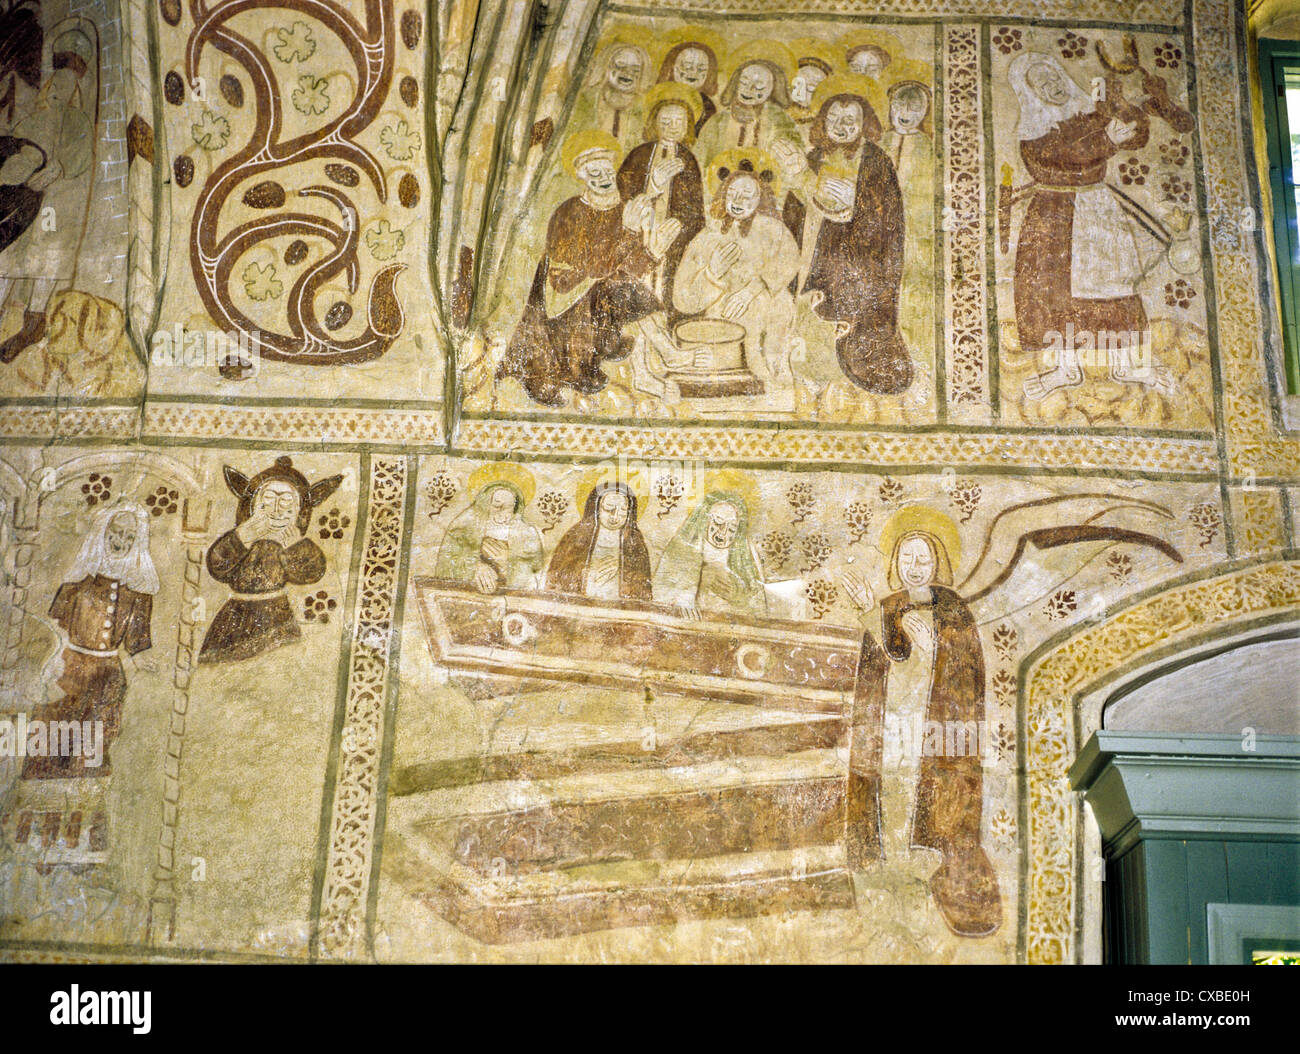 Wall murals in the 15th century Espoo Cathedral, Espoo, Finland Stock Photo